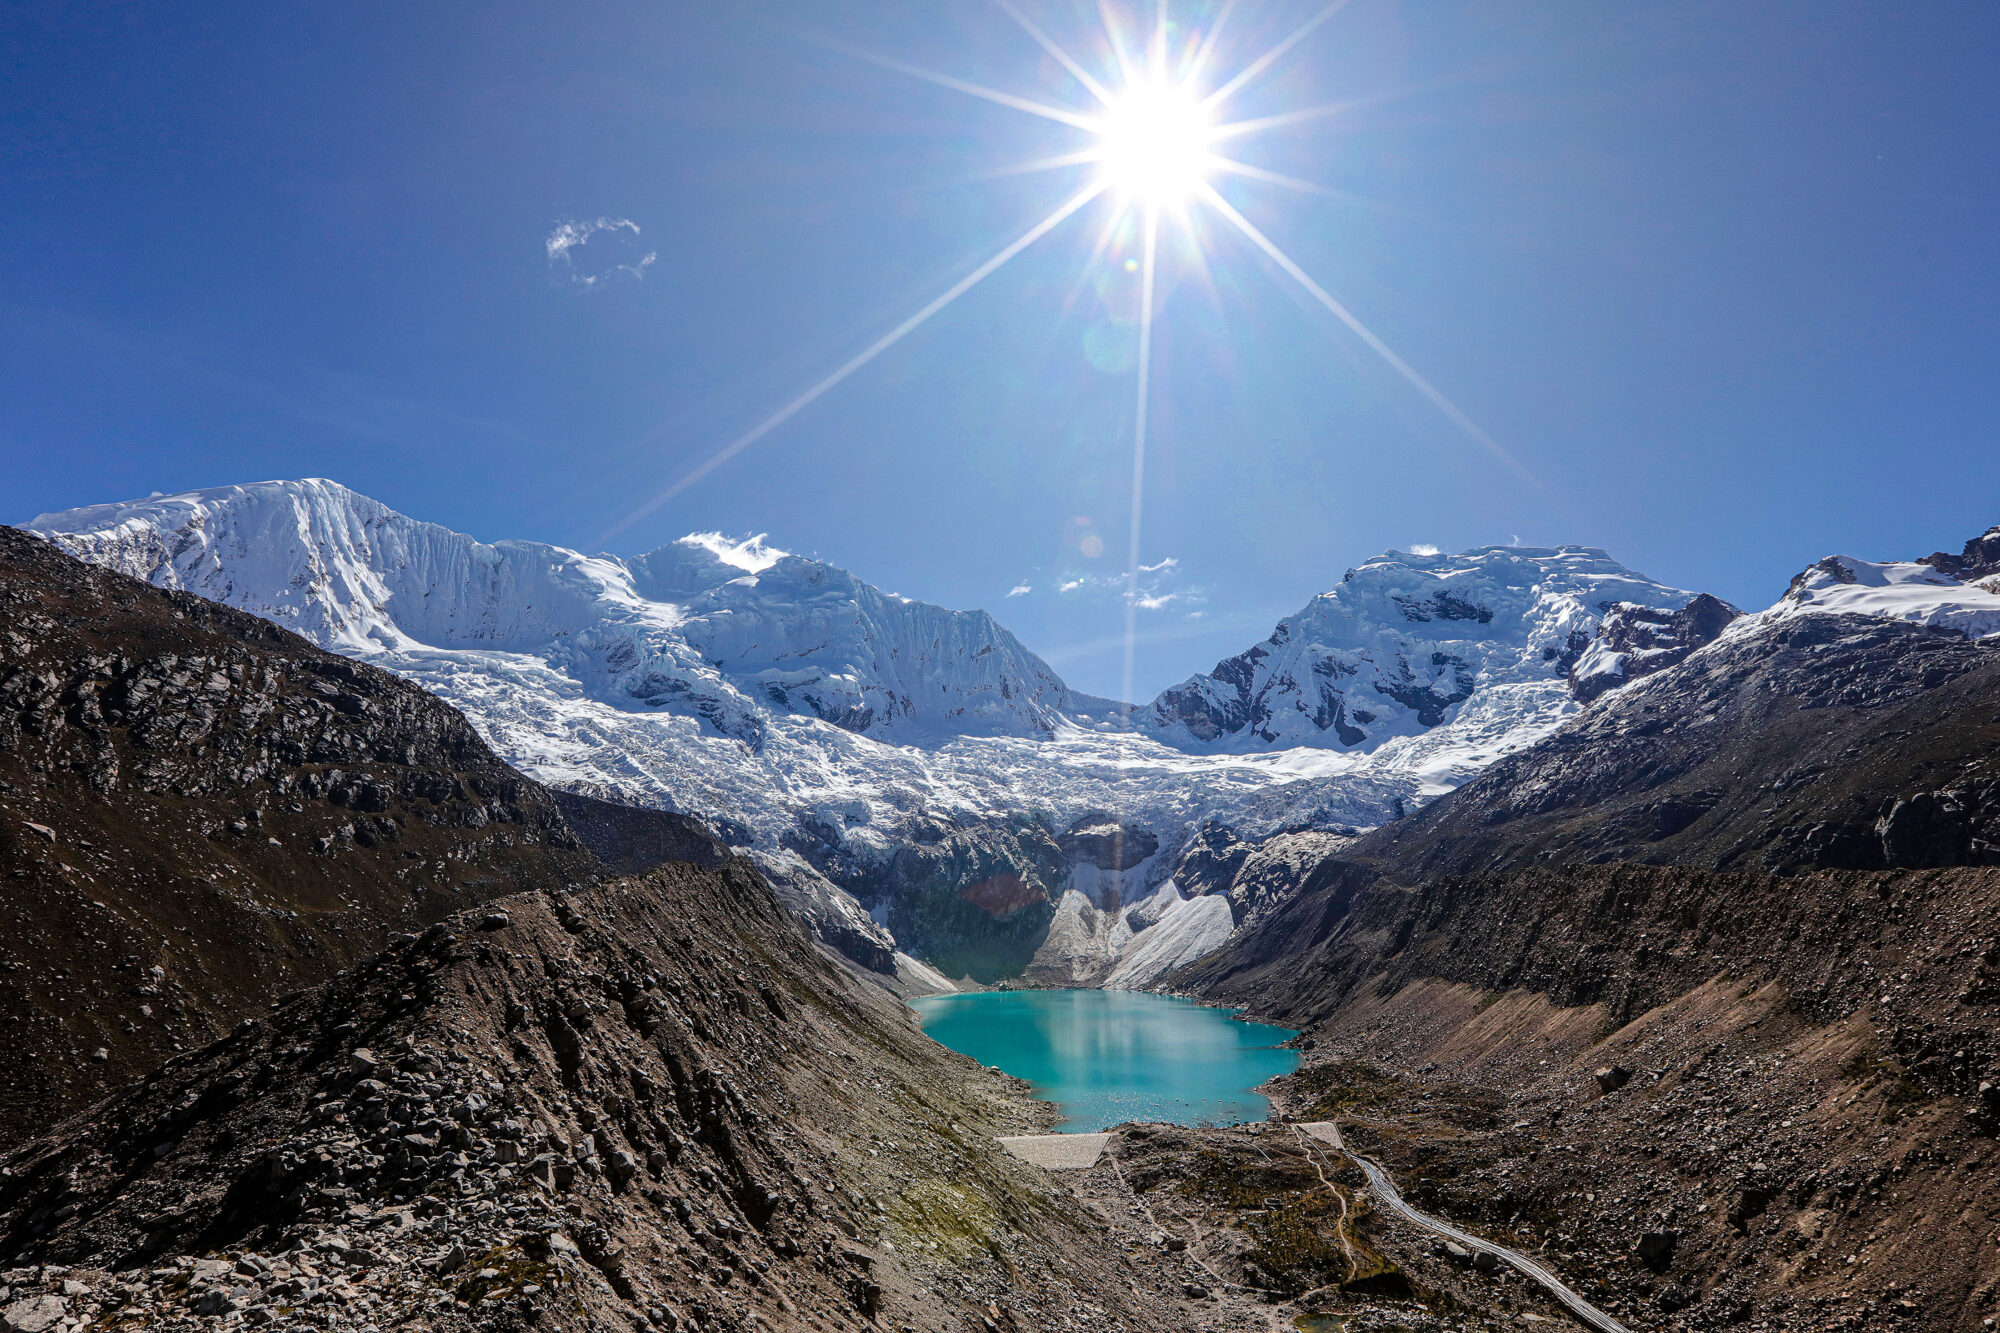 <p>Lake Palcacocha, located in the Cordillera Blanca range of the Peruvian Andes, has grown 34 times larger over the past four decades due to melting glaciers (Image: Walter Huipu / Germanwatch)</p>